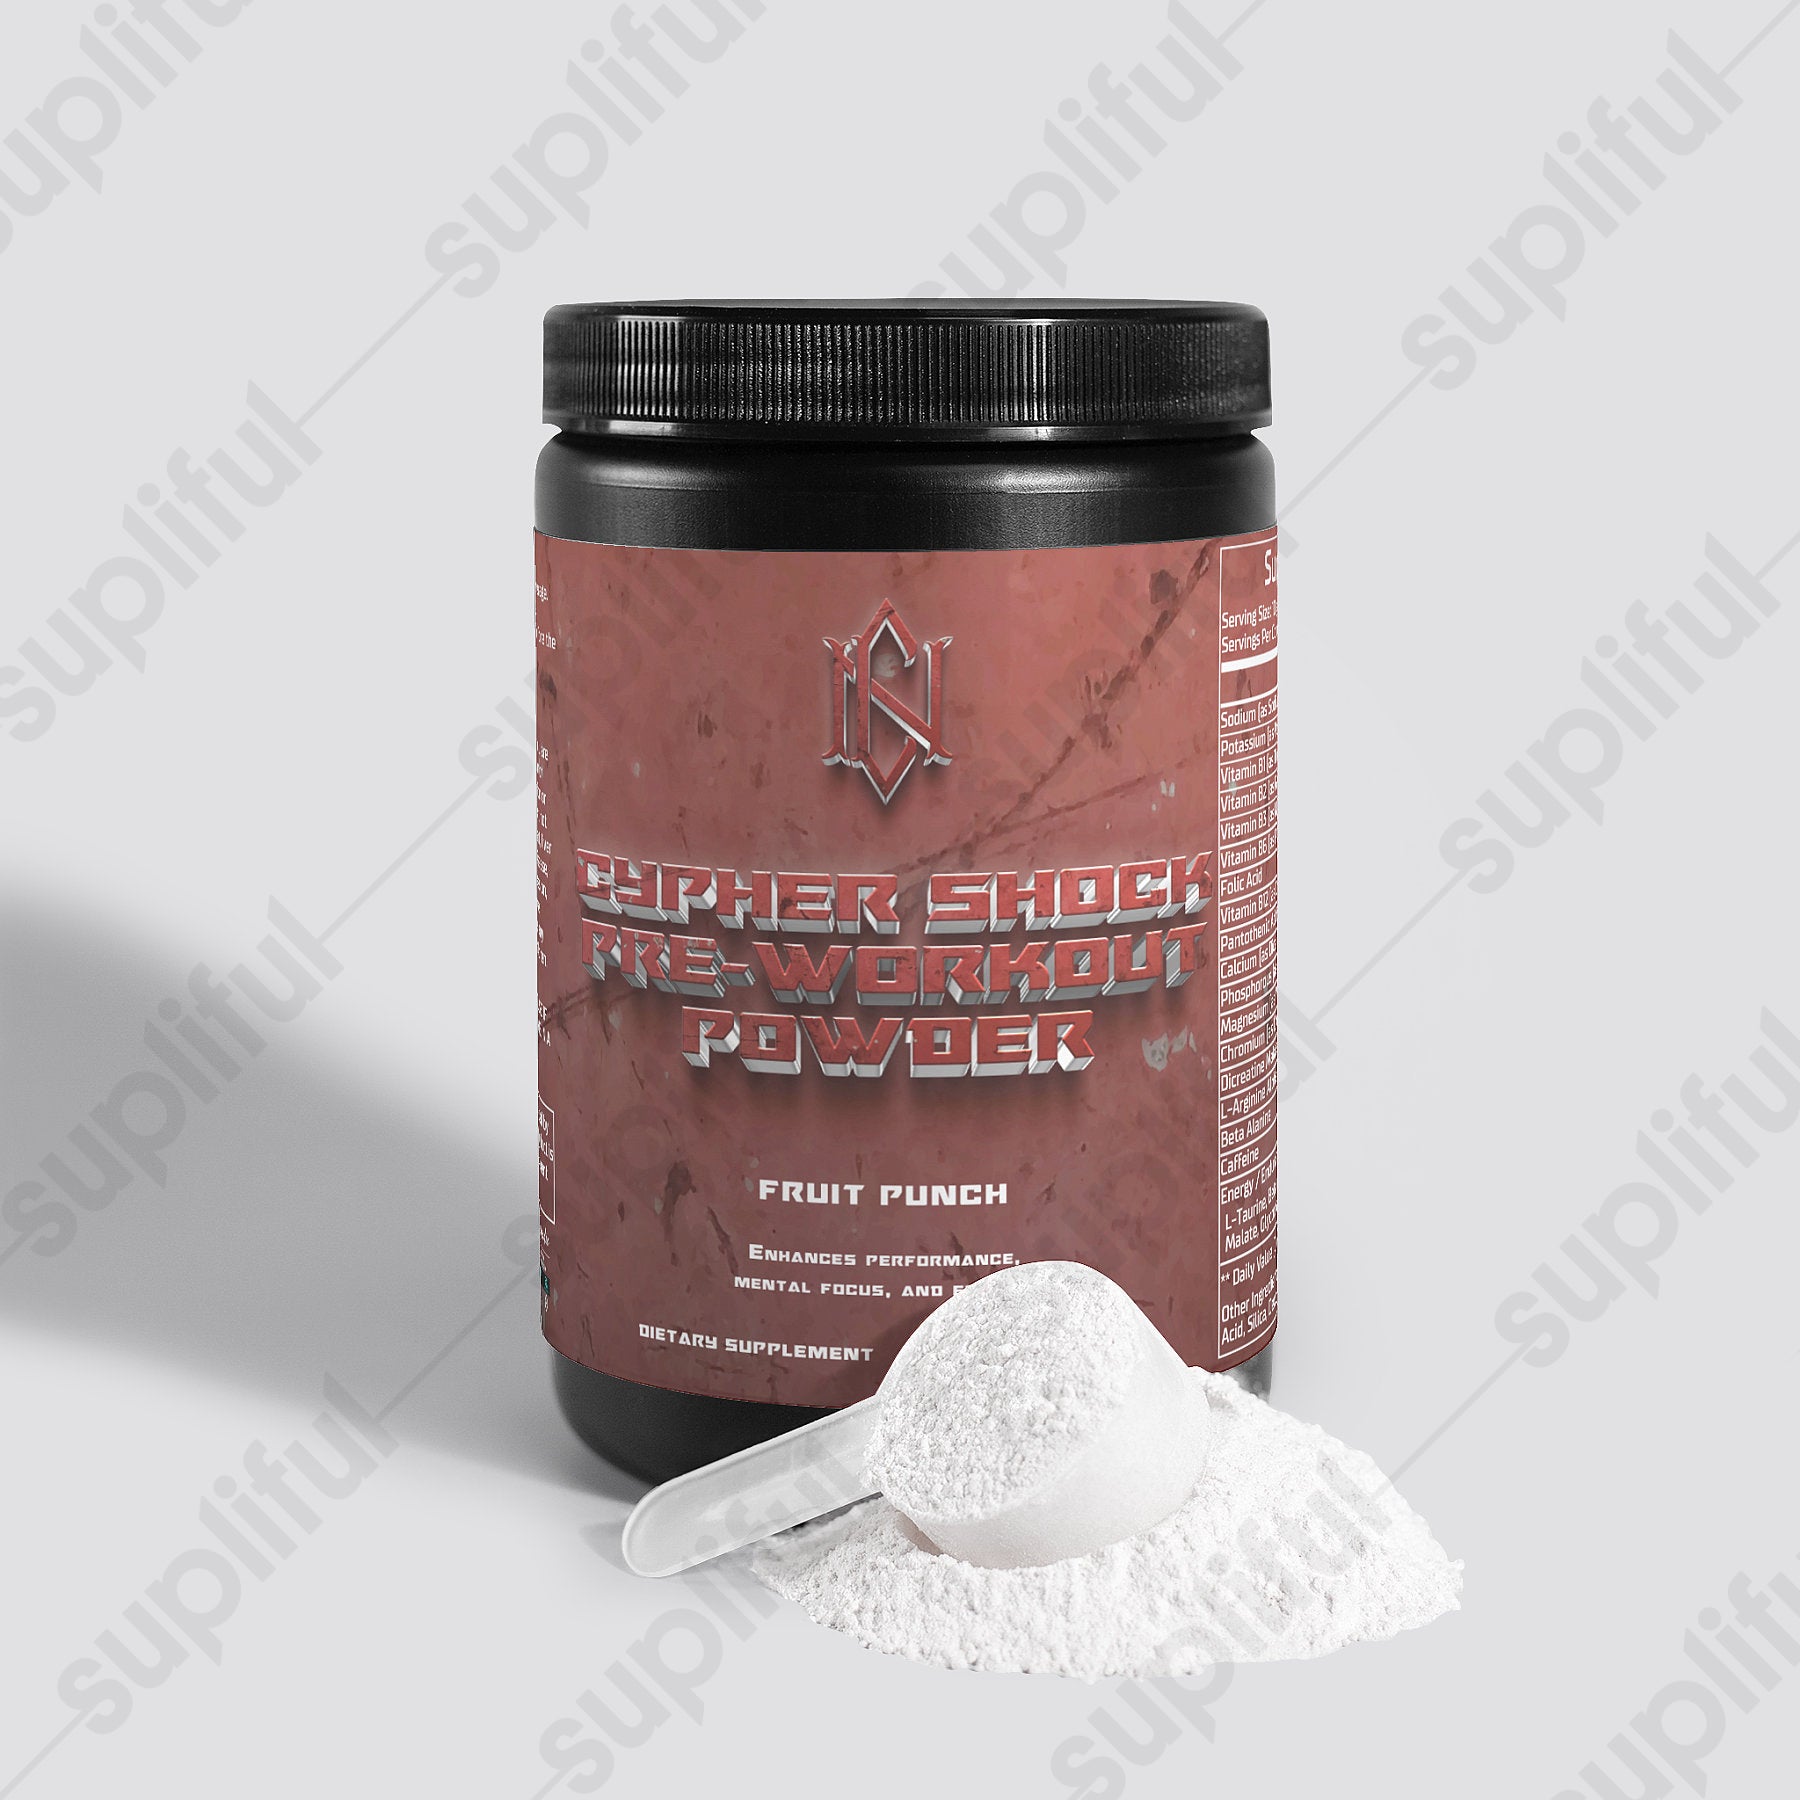 Cypher Shock Pre-Workout Powder (Fruit Punch) Cypher Nomadic Apparel